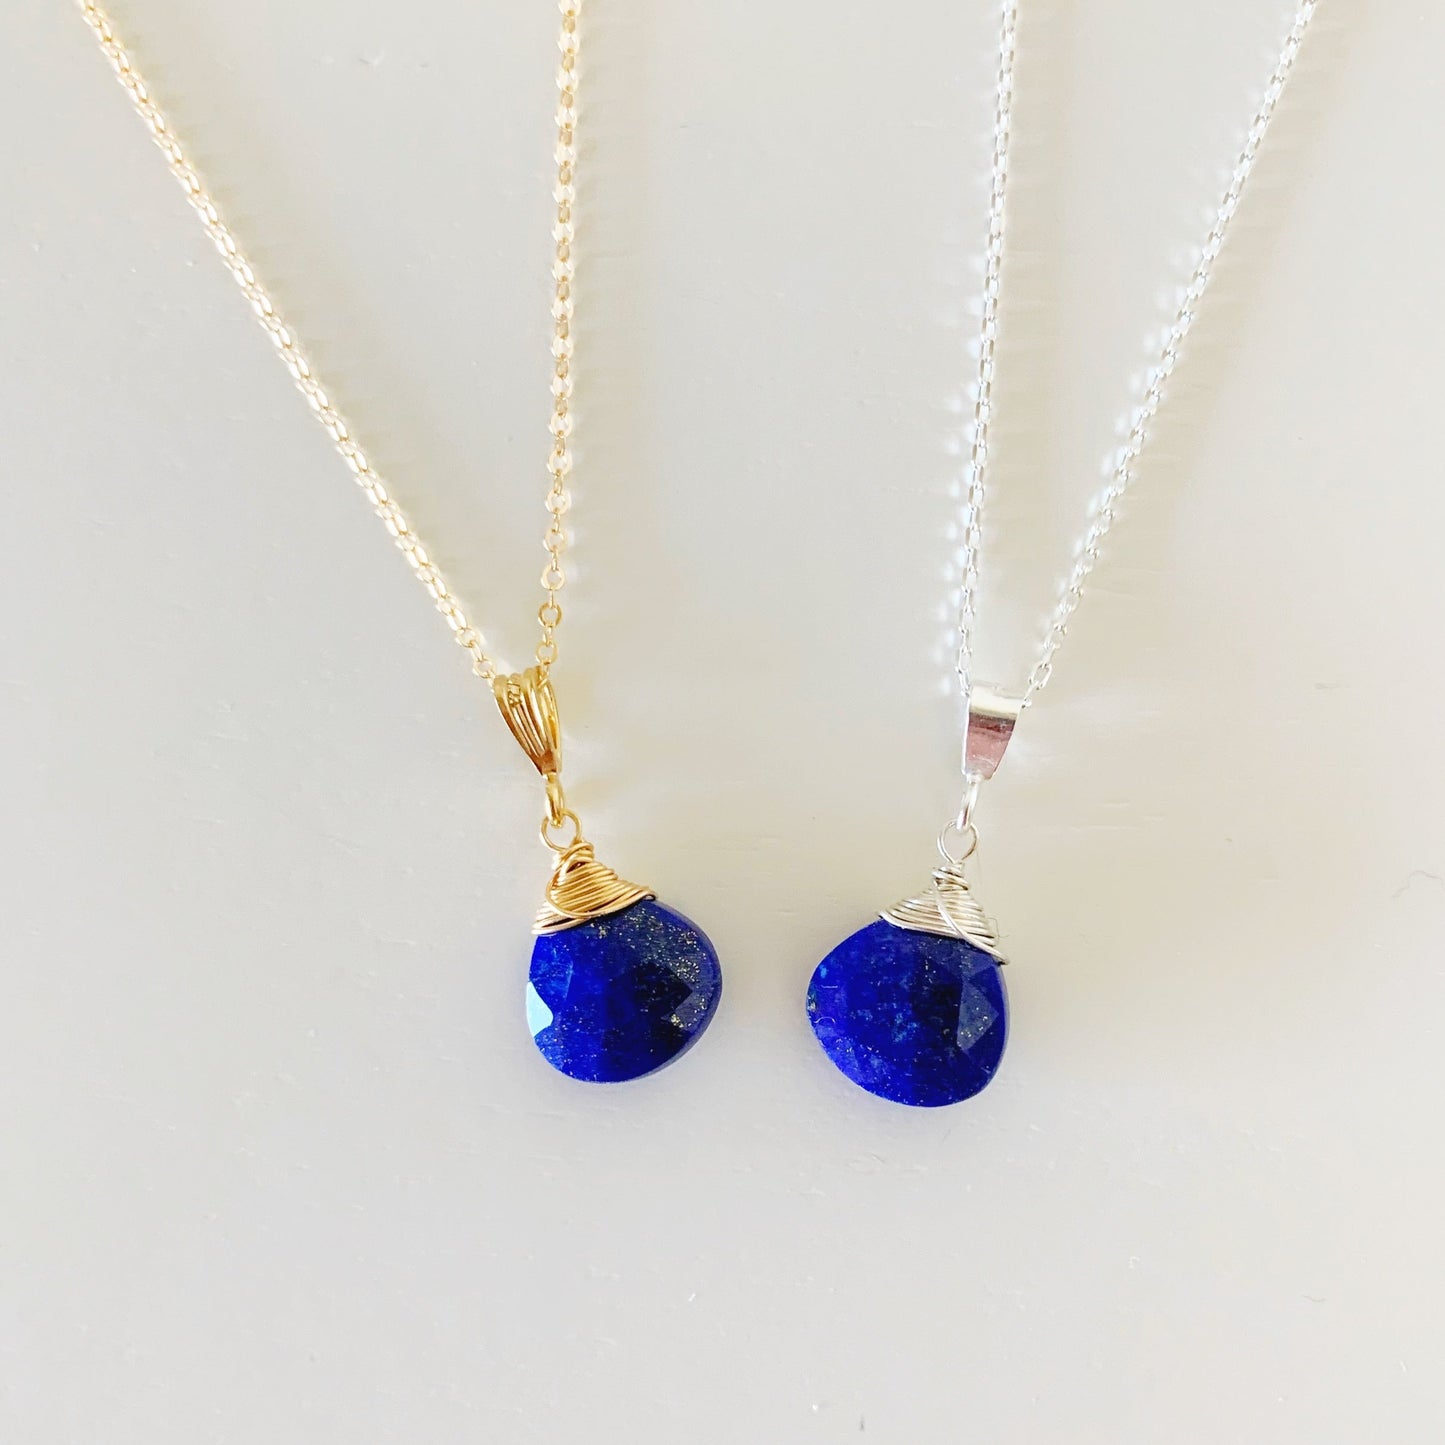 Neptune pendant necklace by mermaids and madeleines with blue lapis briolette is wire wrapped  available sterling silver or 14k gold filled. Photographed here are 2 neptune pendants one in sterling silver and one 14k gold filled pictured on a white background.